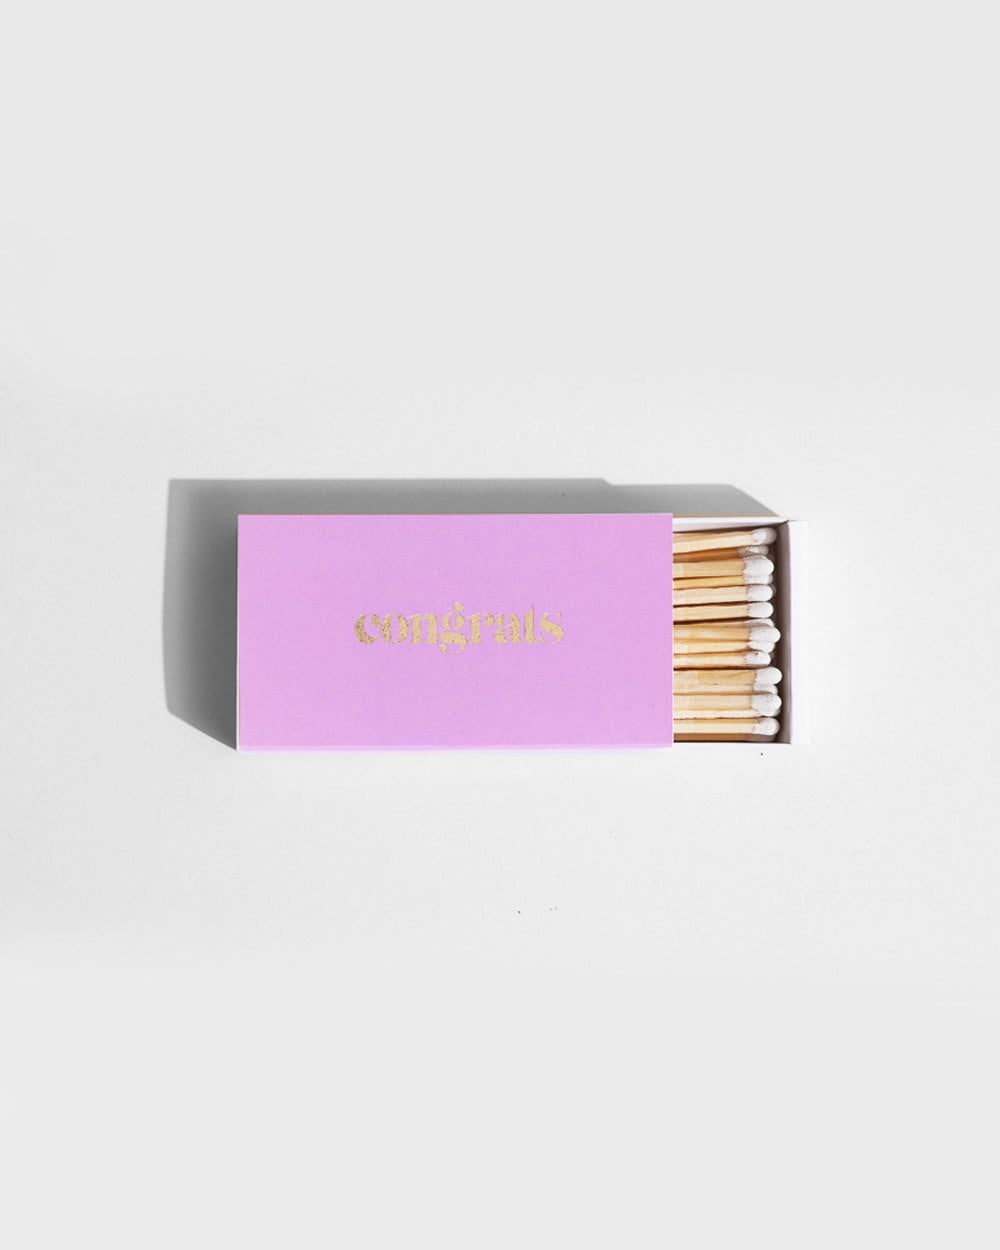 The CONGRATS Lilac Long Matches by Brooklyn Candle Studio feature a chic matchbox with a purple cover adorned with the word "congrats" in shimmering gold letters. The partially open box showcases the white-tipped XL matches inside, making it ideal for special occasions. The stylish design is highlighted against a simple white background.